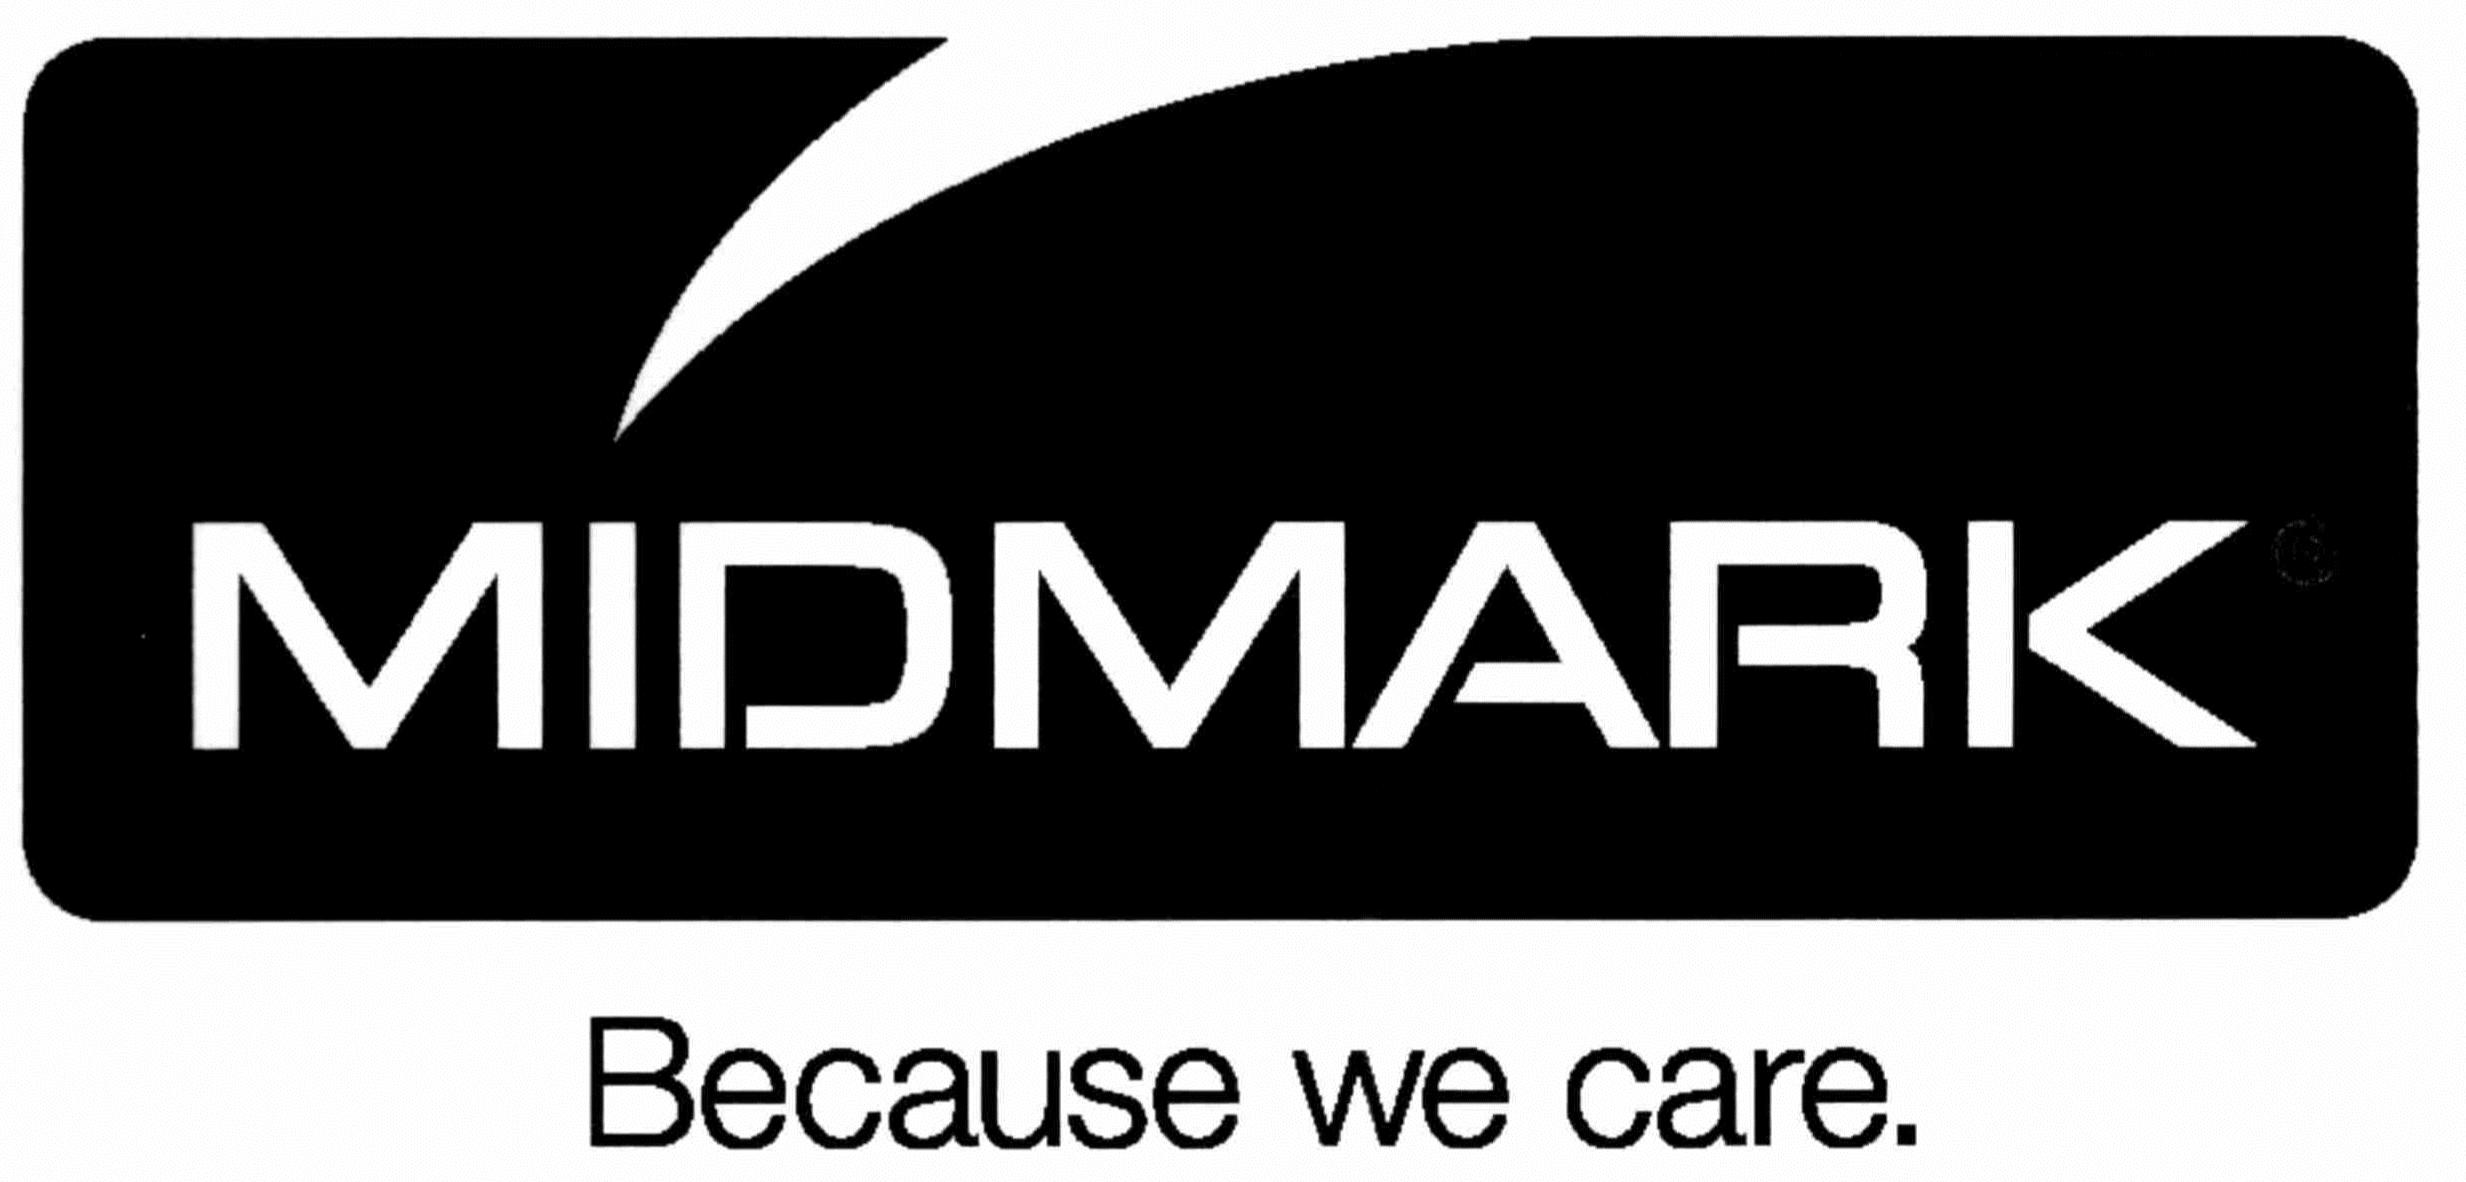  MIDMARK BECAUSE WE CARE